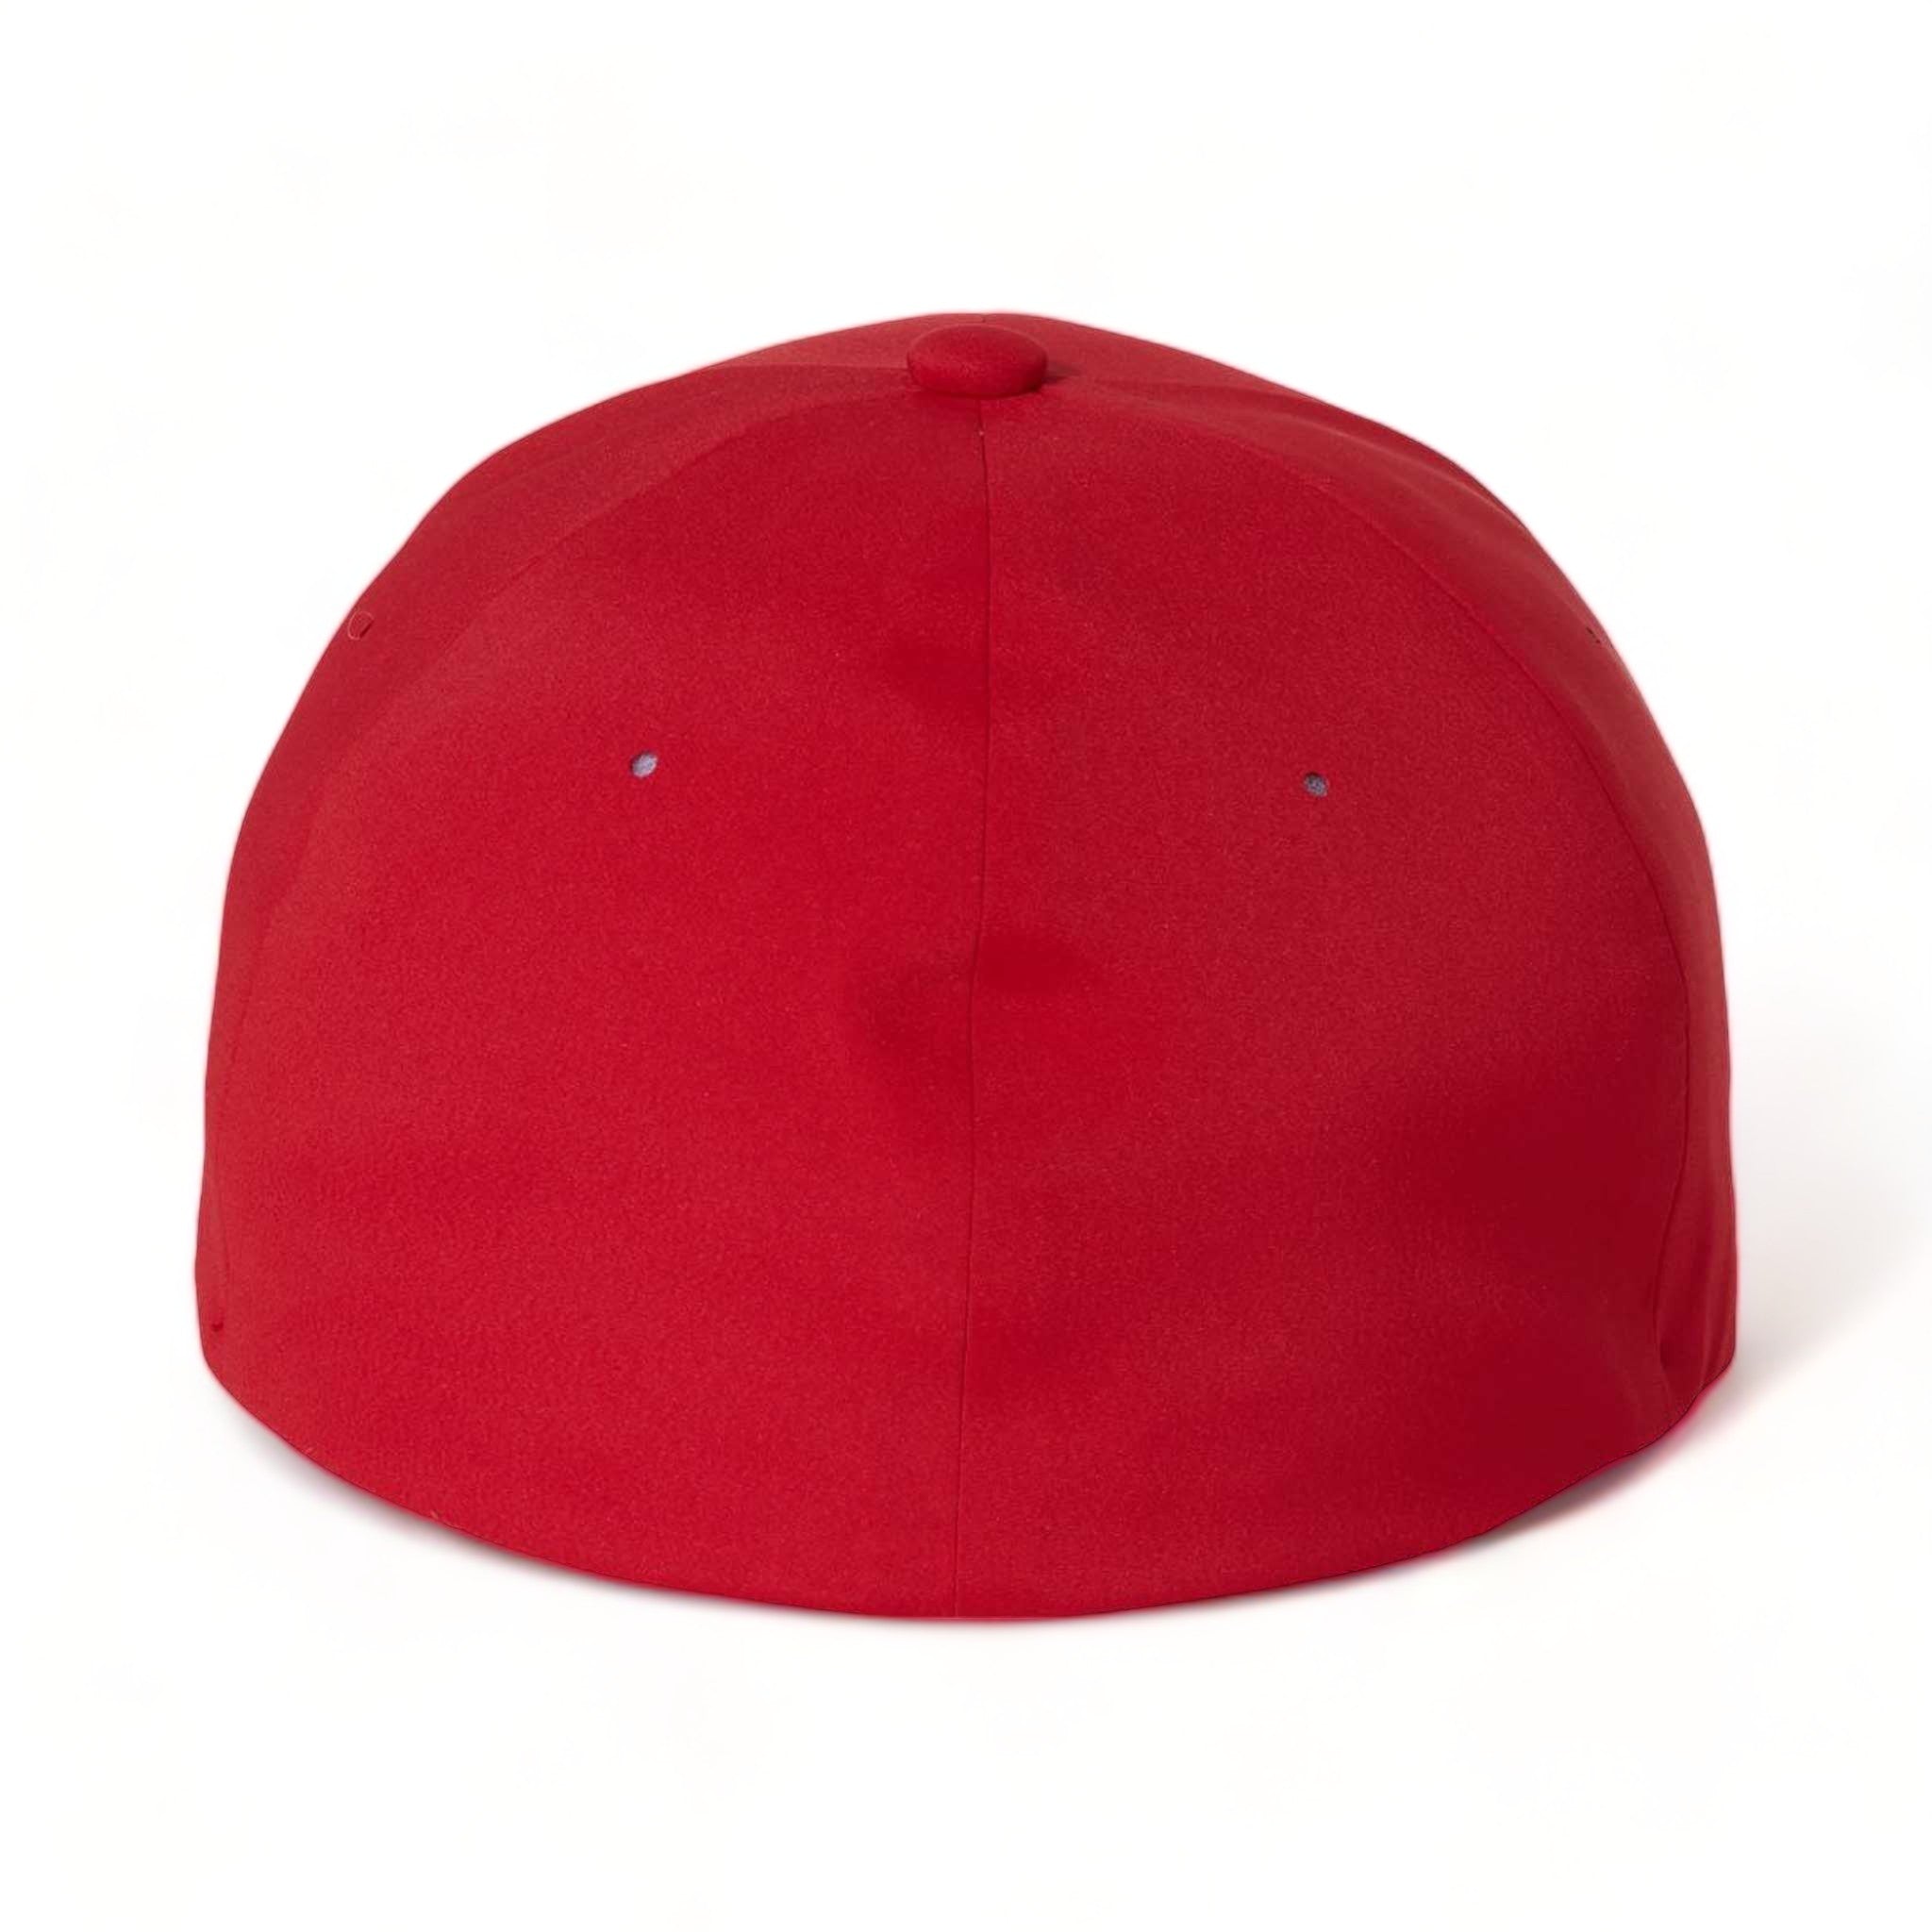 Back view of Flexfit 180 custom hat in red